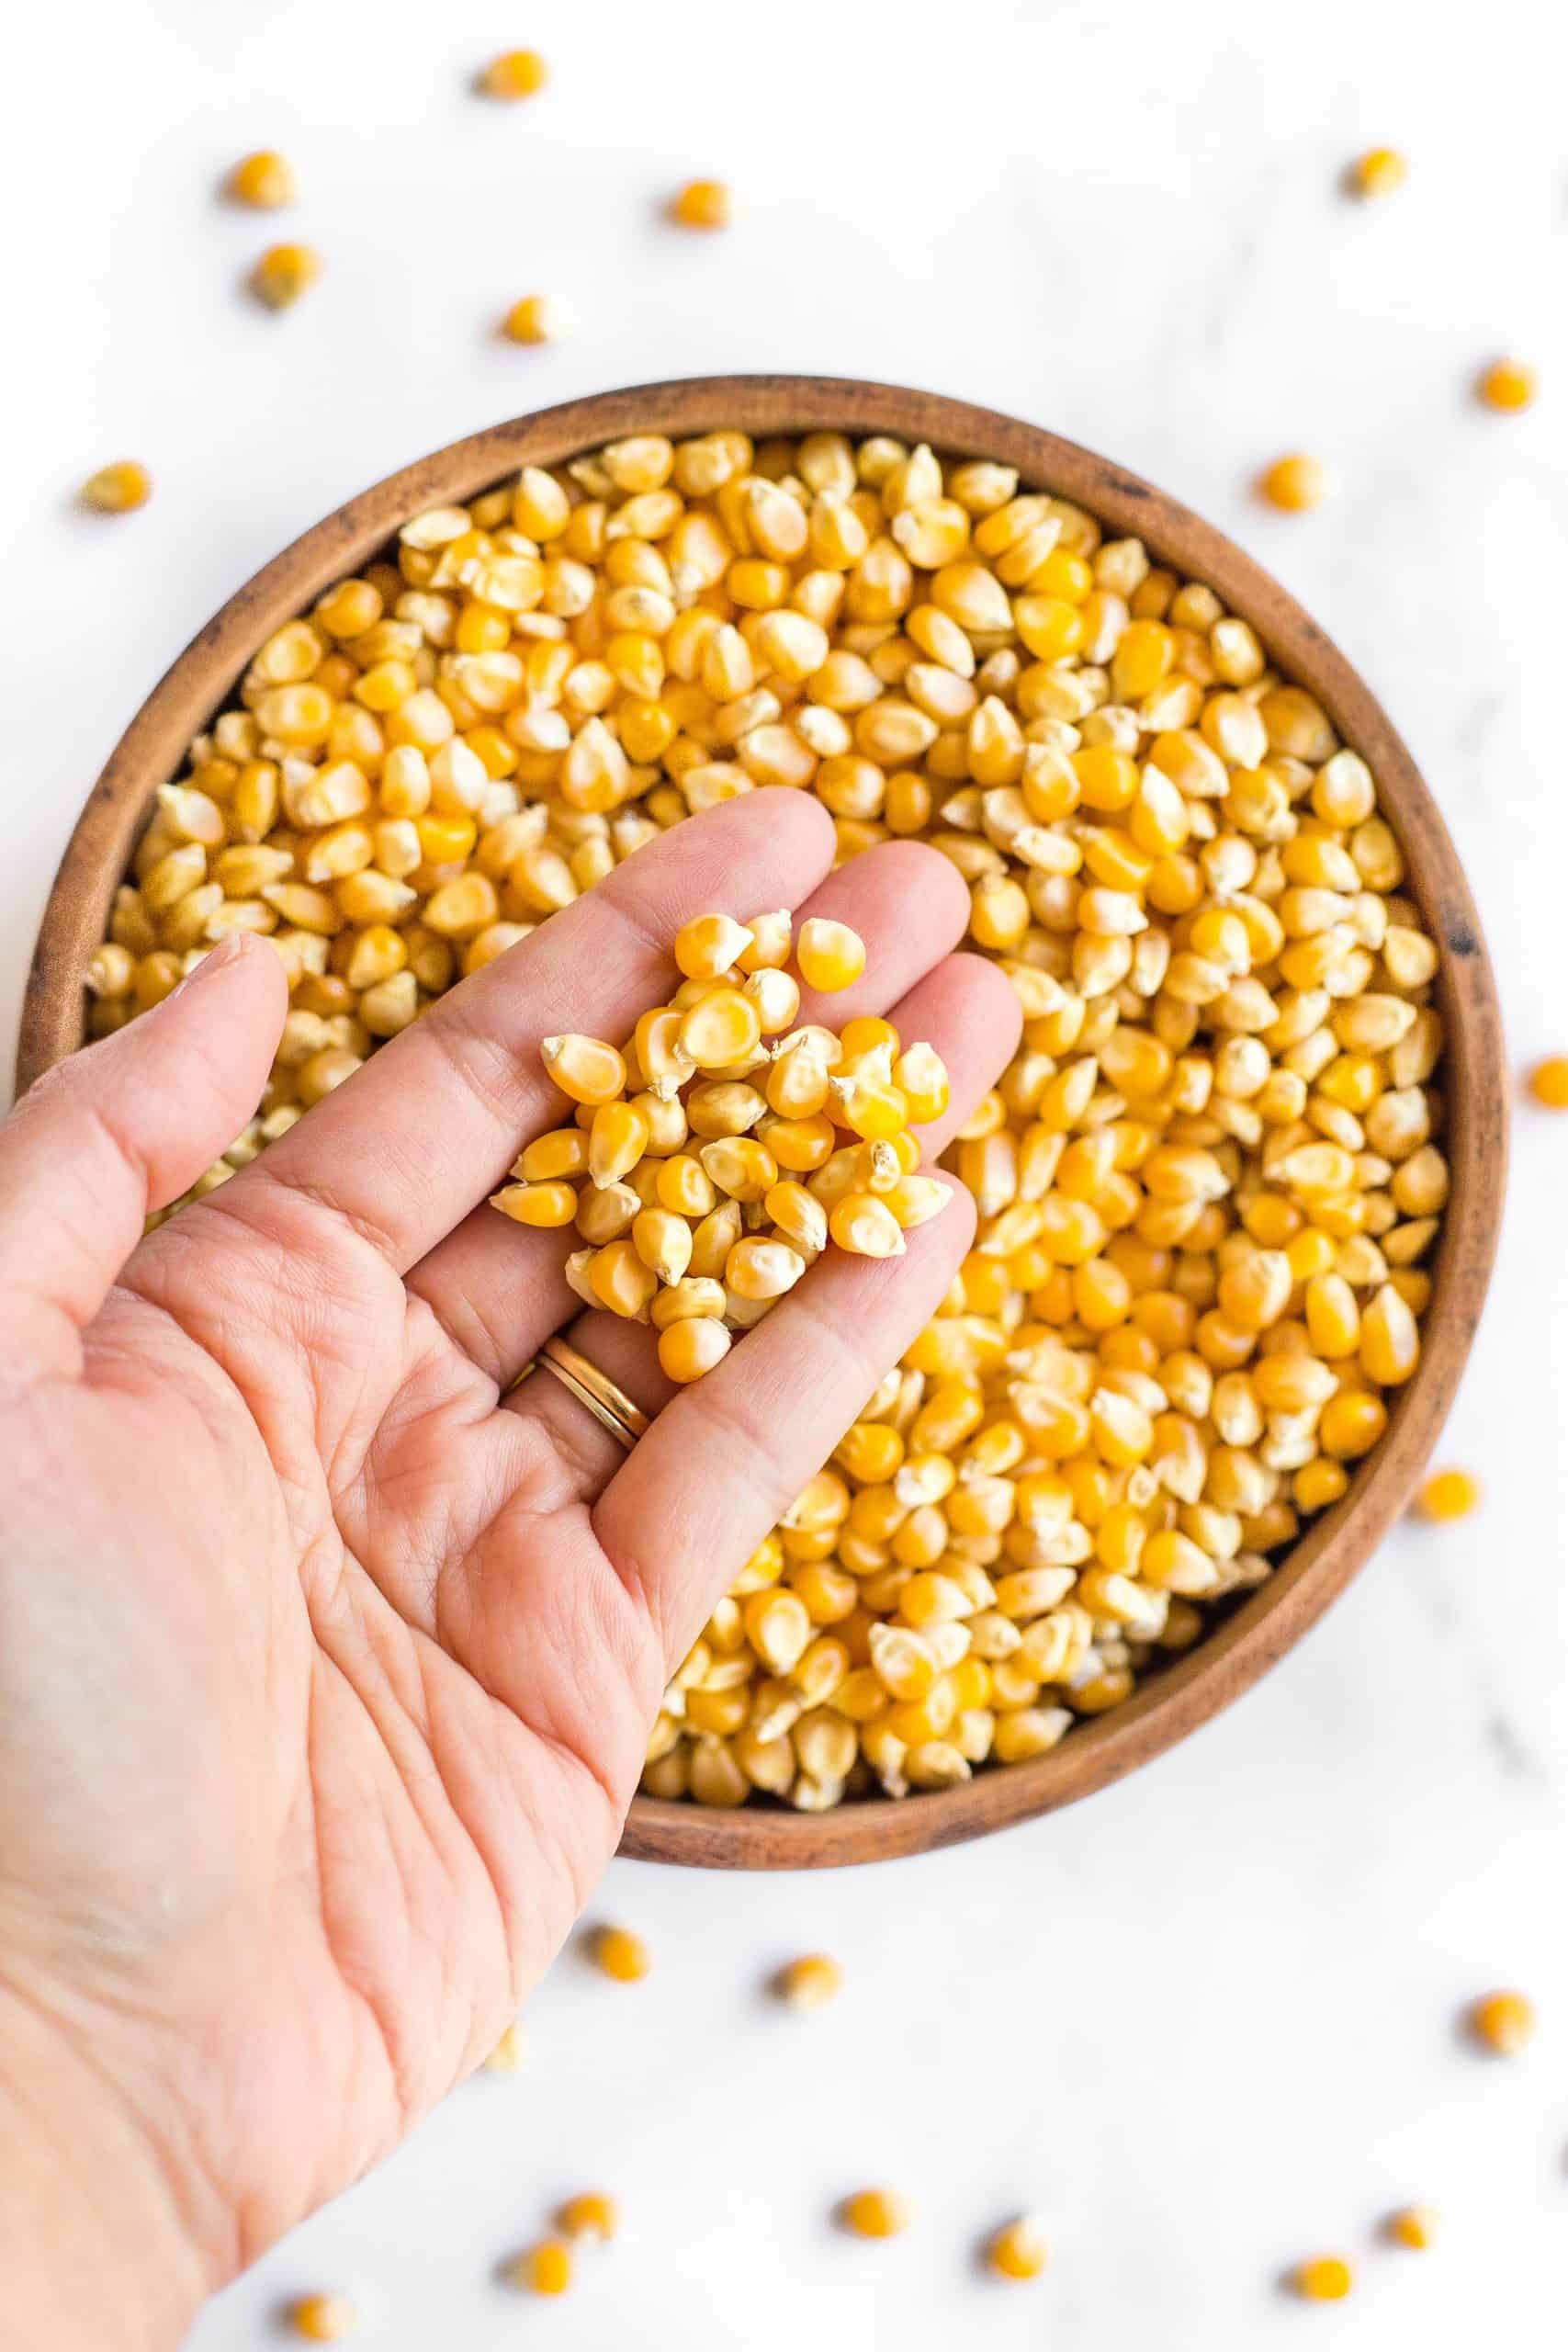 Hand holding up corn kernels from a bowl.